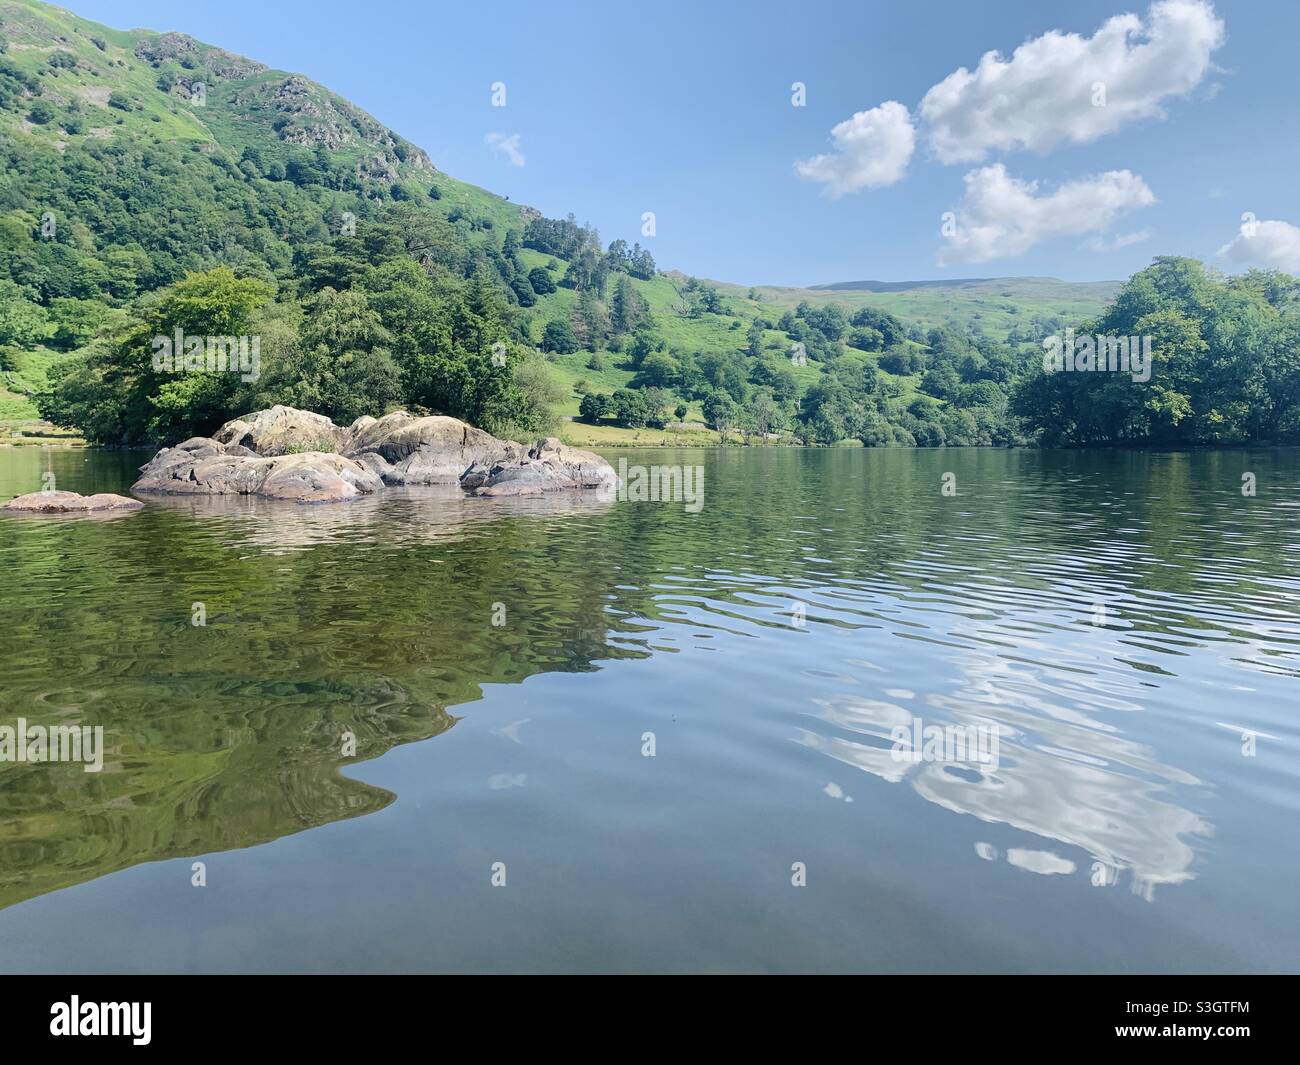 Reflection across the lake at rydal water Stock Photo